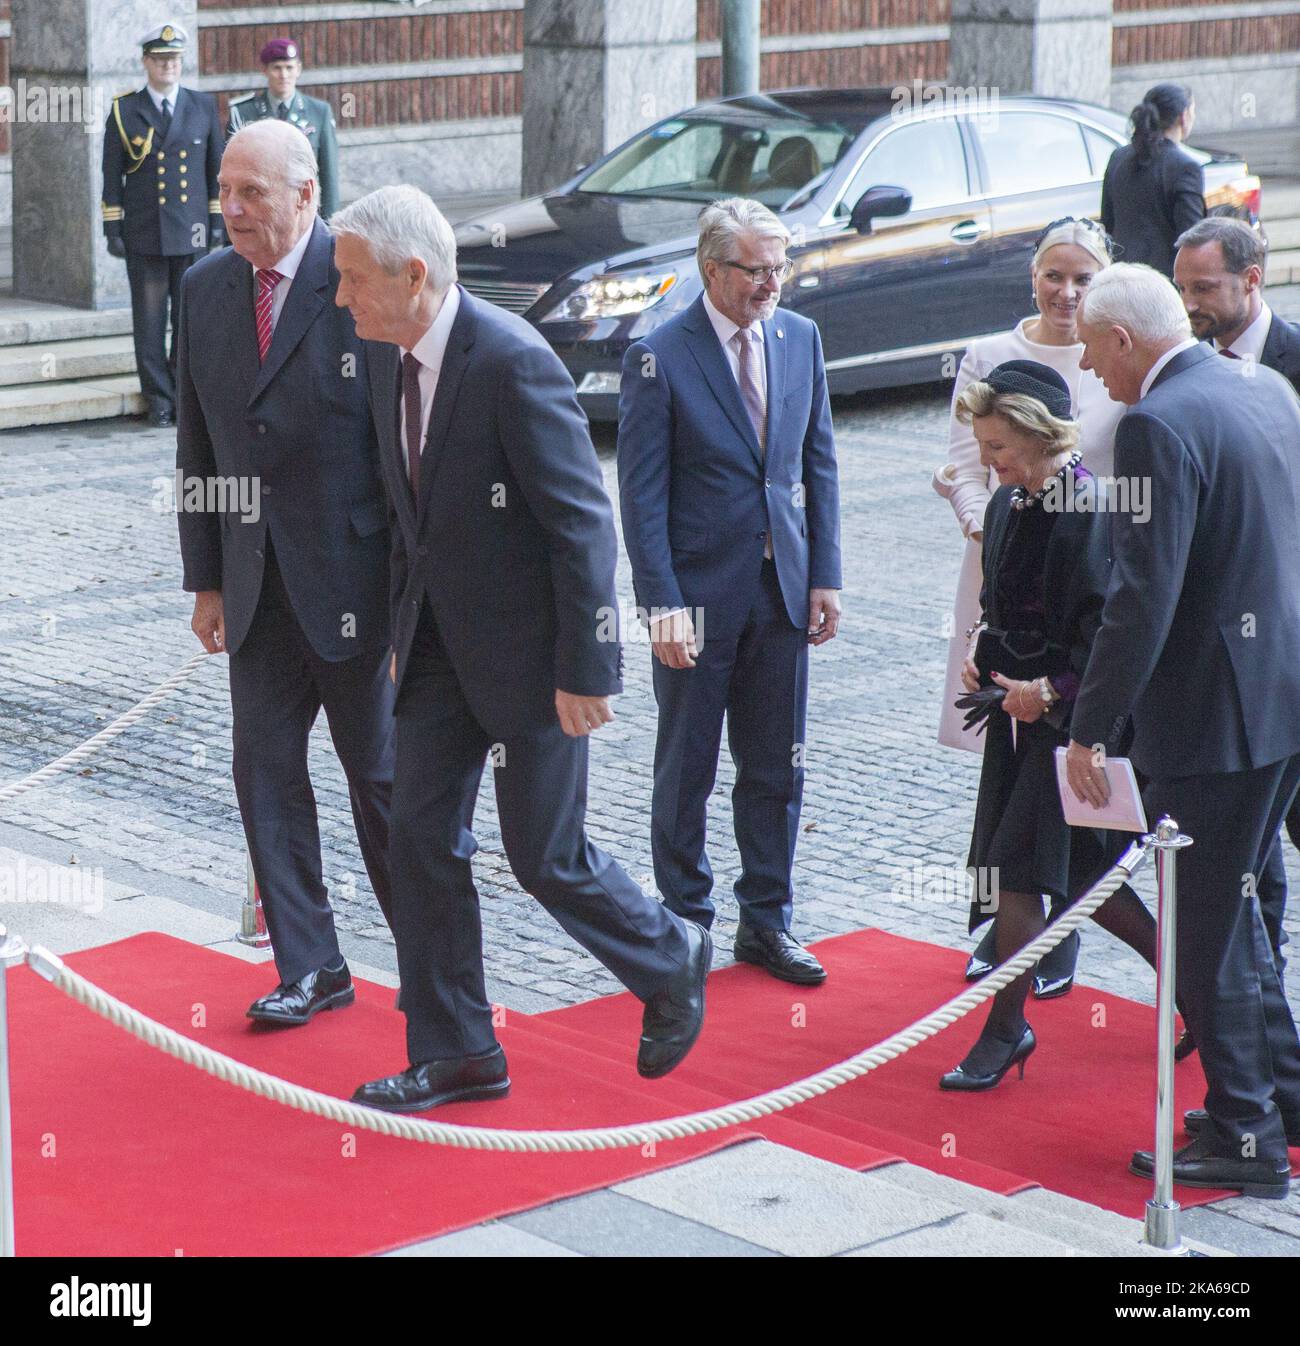 Oslo 20141210. Nobel Peace Prize 2014. The Royal Family arrive Town Hall to attend the ceremony Wednesday From Left: King Harald, Chair of the Norwegian Nobel Committee Thorbjoern Jagland, Mayor Fabian Stang, Queen Sonja, Crown Princess Mette-Marit, director of the Norwegian Nobel Institute Geir Lundestad and Crown Prince Haakon. Photo: Torstein Boe/ Stock Photo